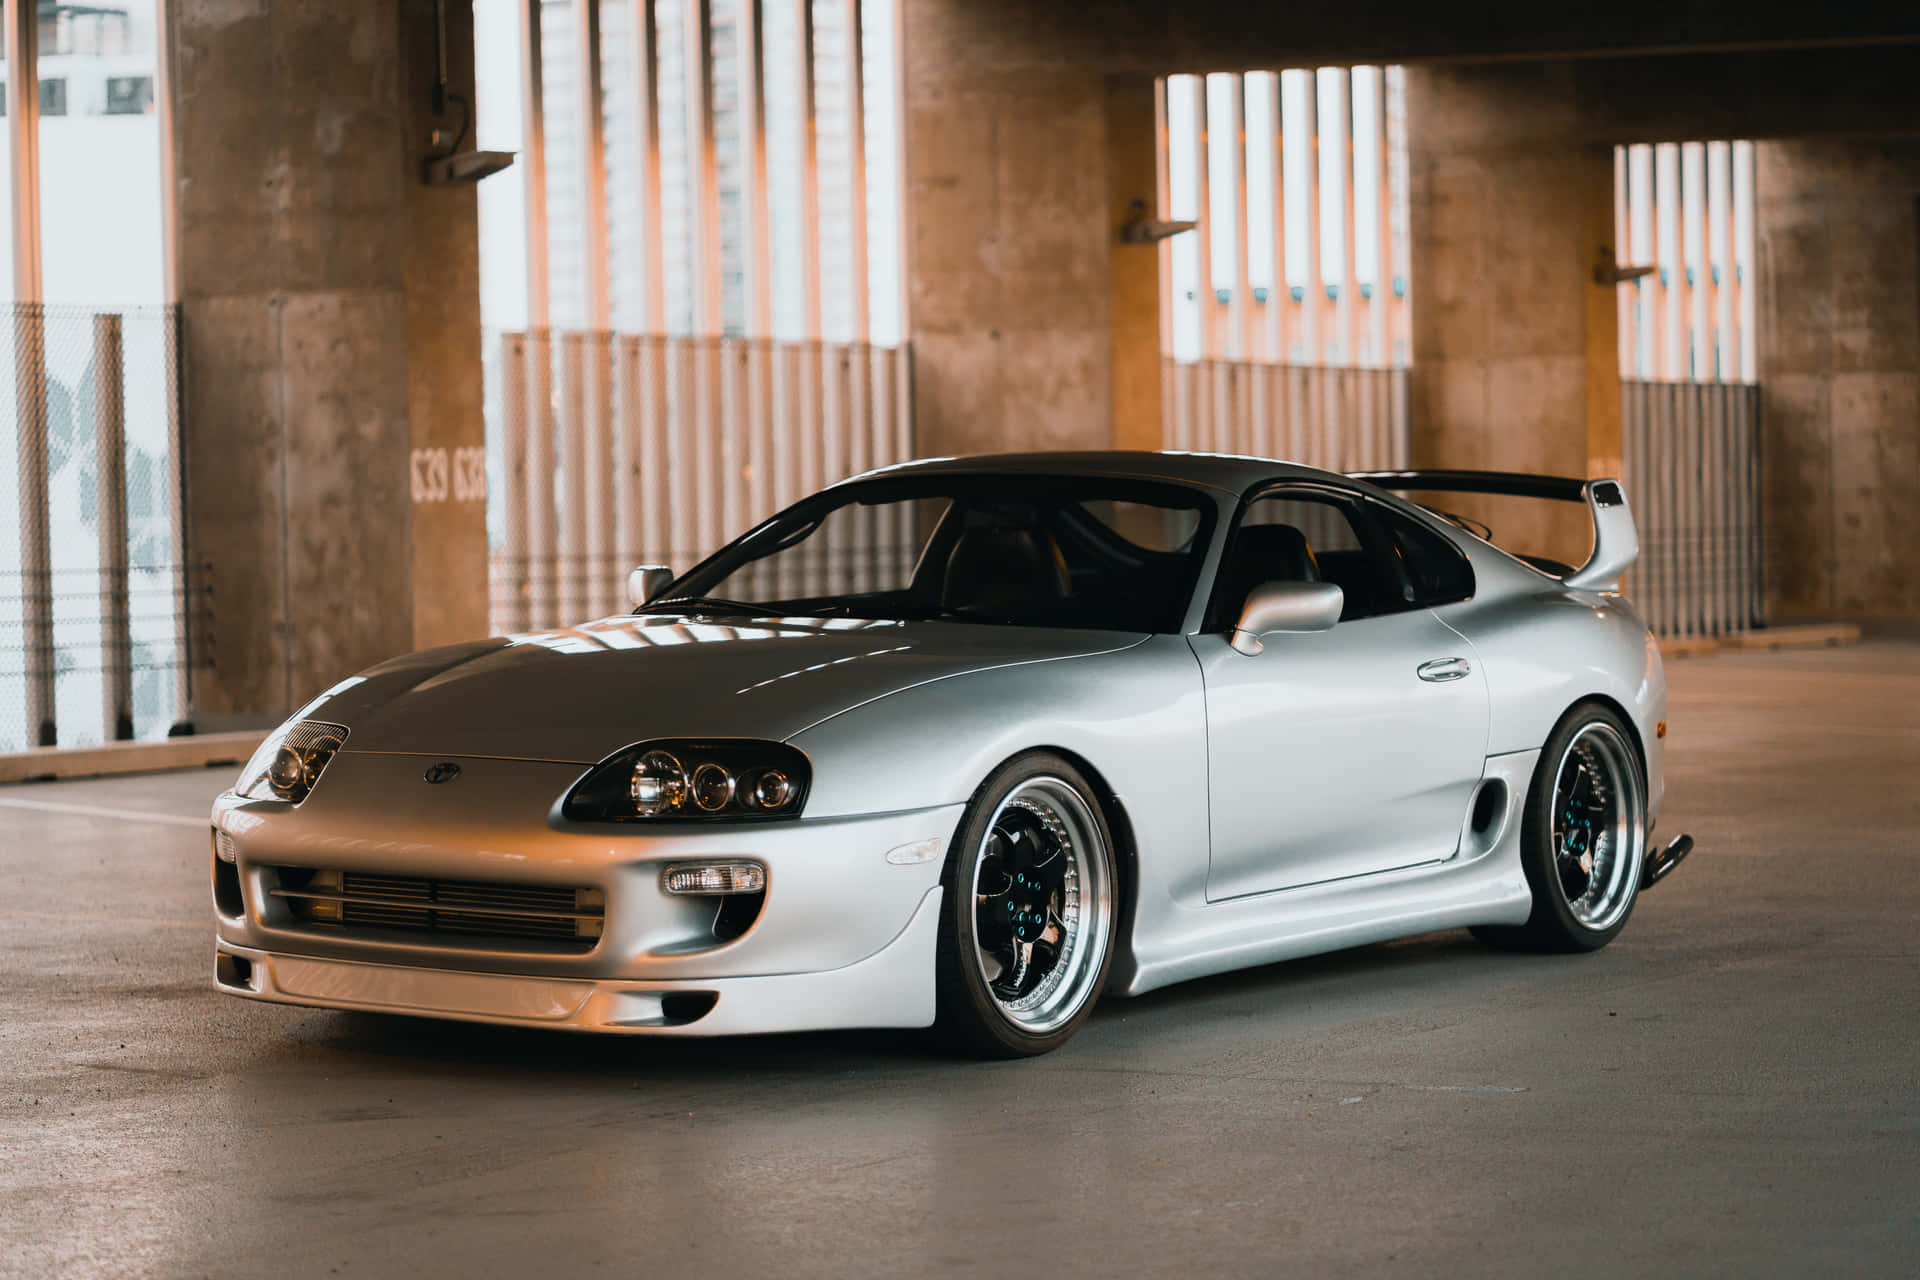 Zoom Past in Style with a Toyota Supra Wallpaper